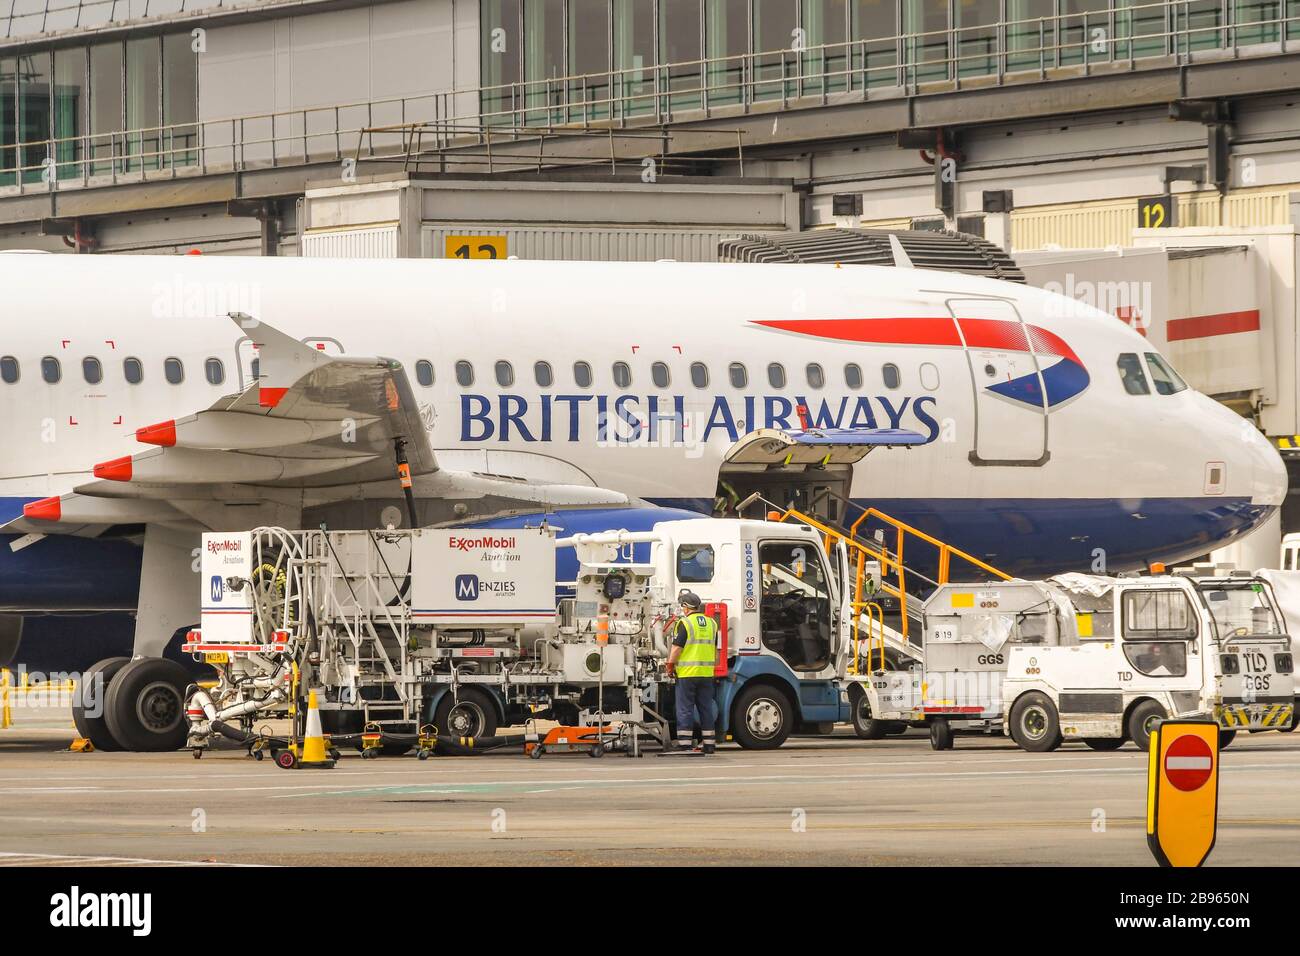 LONDON GATWICK AIRPORT, ENGLAND - APRIL 2019: British Airways Airbus jet being refuelled at London Gatwick Airport Stock Photo